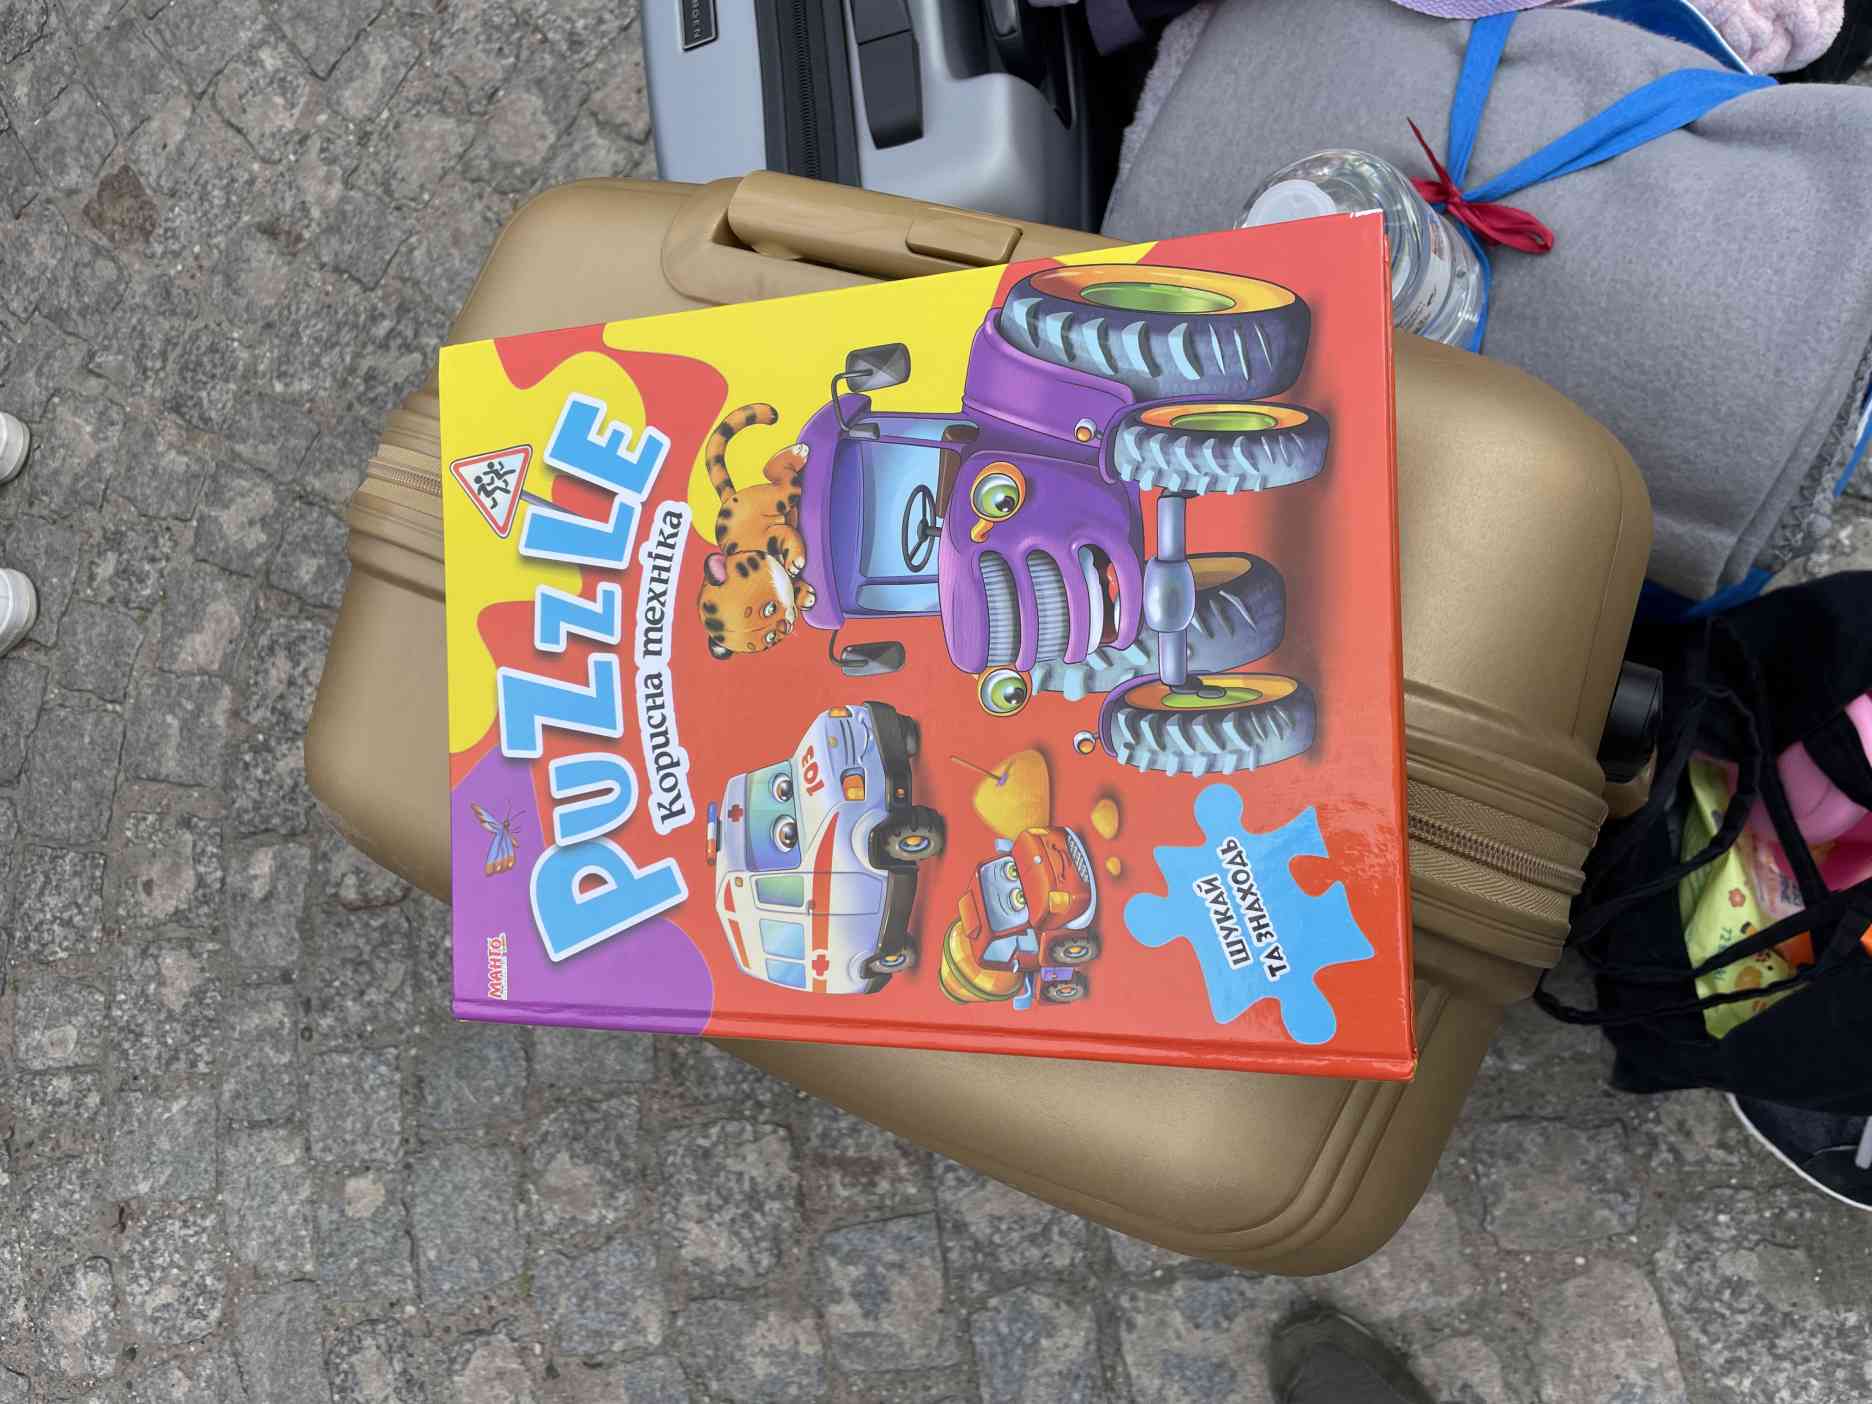 Children mainly play on their laptops, but sometimes you find a puzzle on the luggage. 